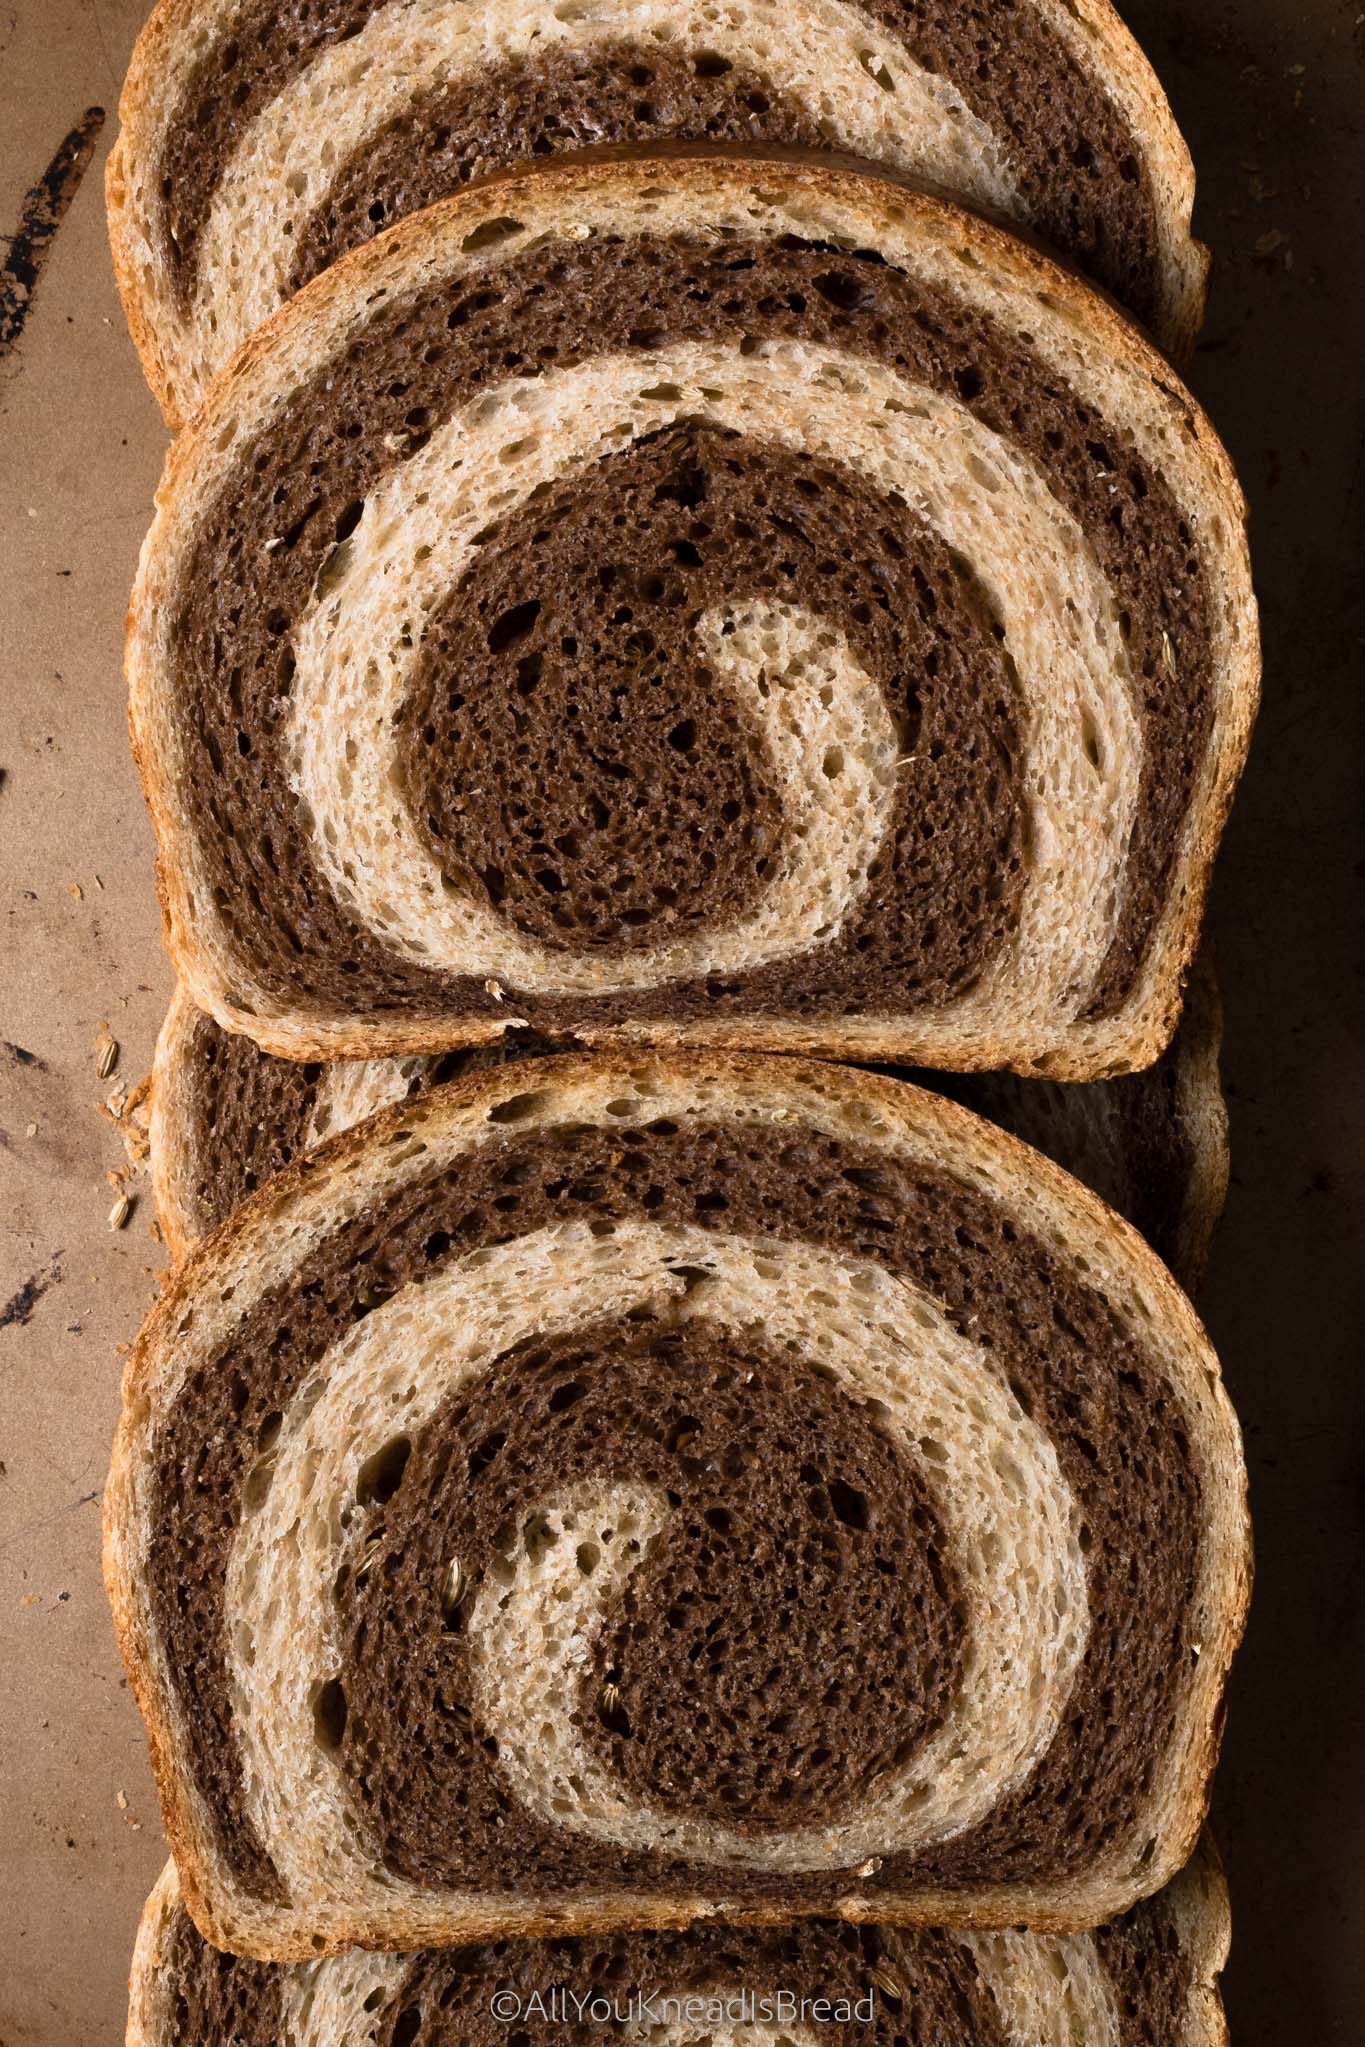 How to make Sourdough Marble Rye Bread - All you knead is bread